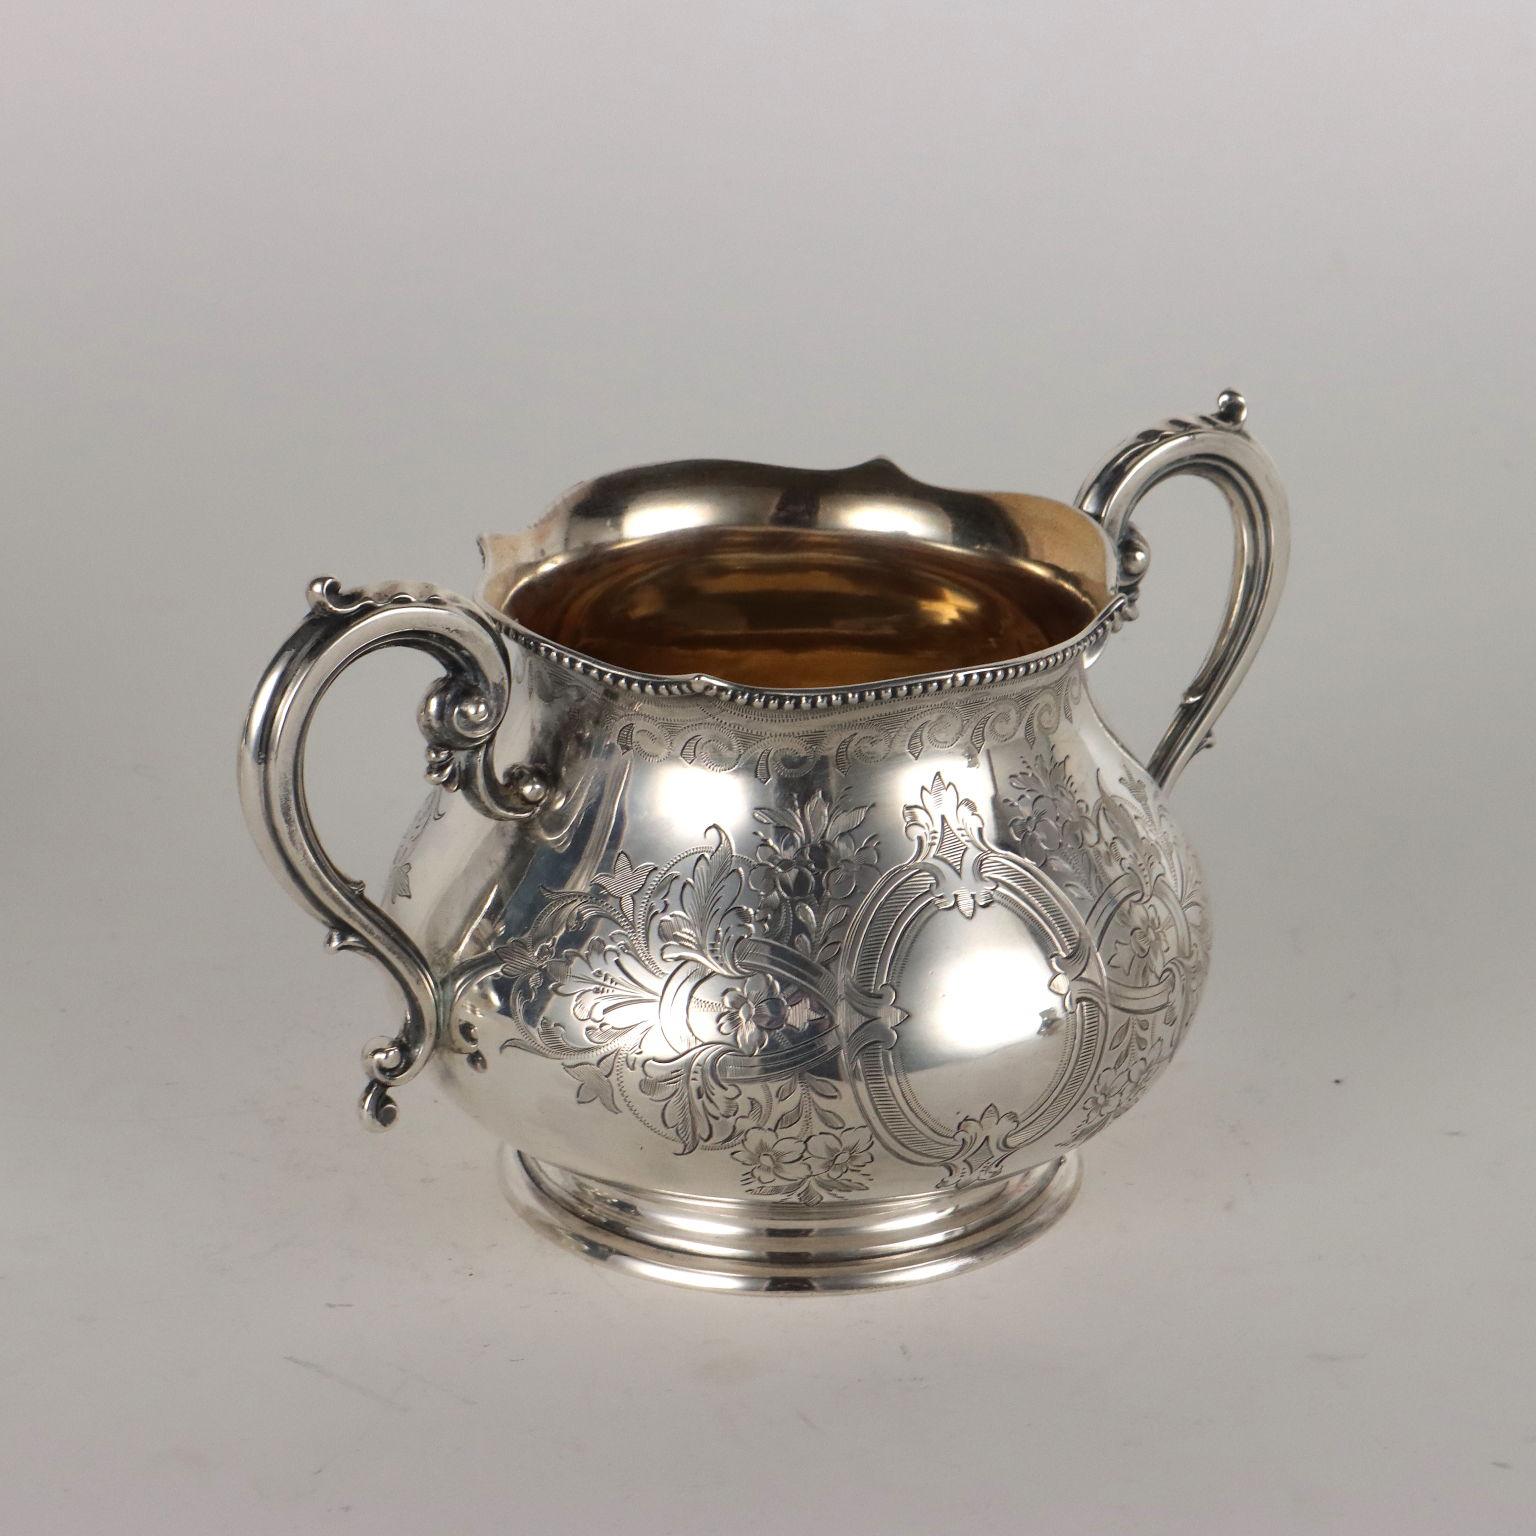 Martin Hall & Co 925 Sterling Silver Tea and Coffee Service For Sale 2